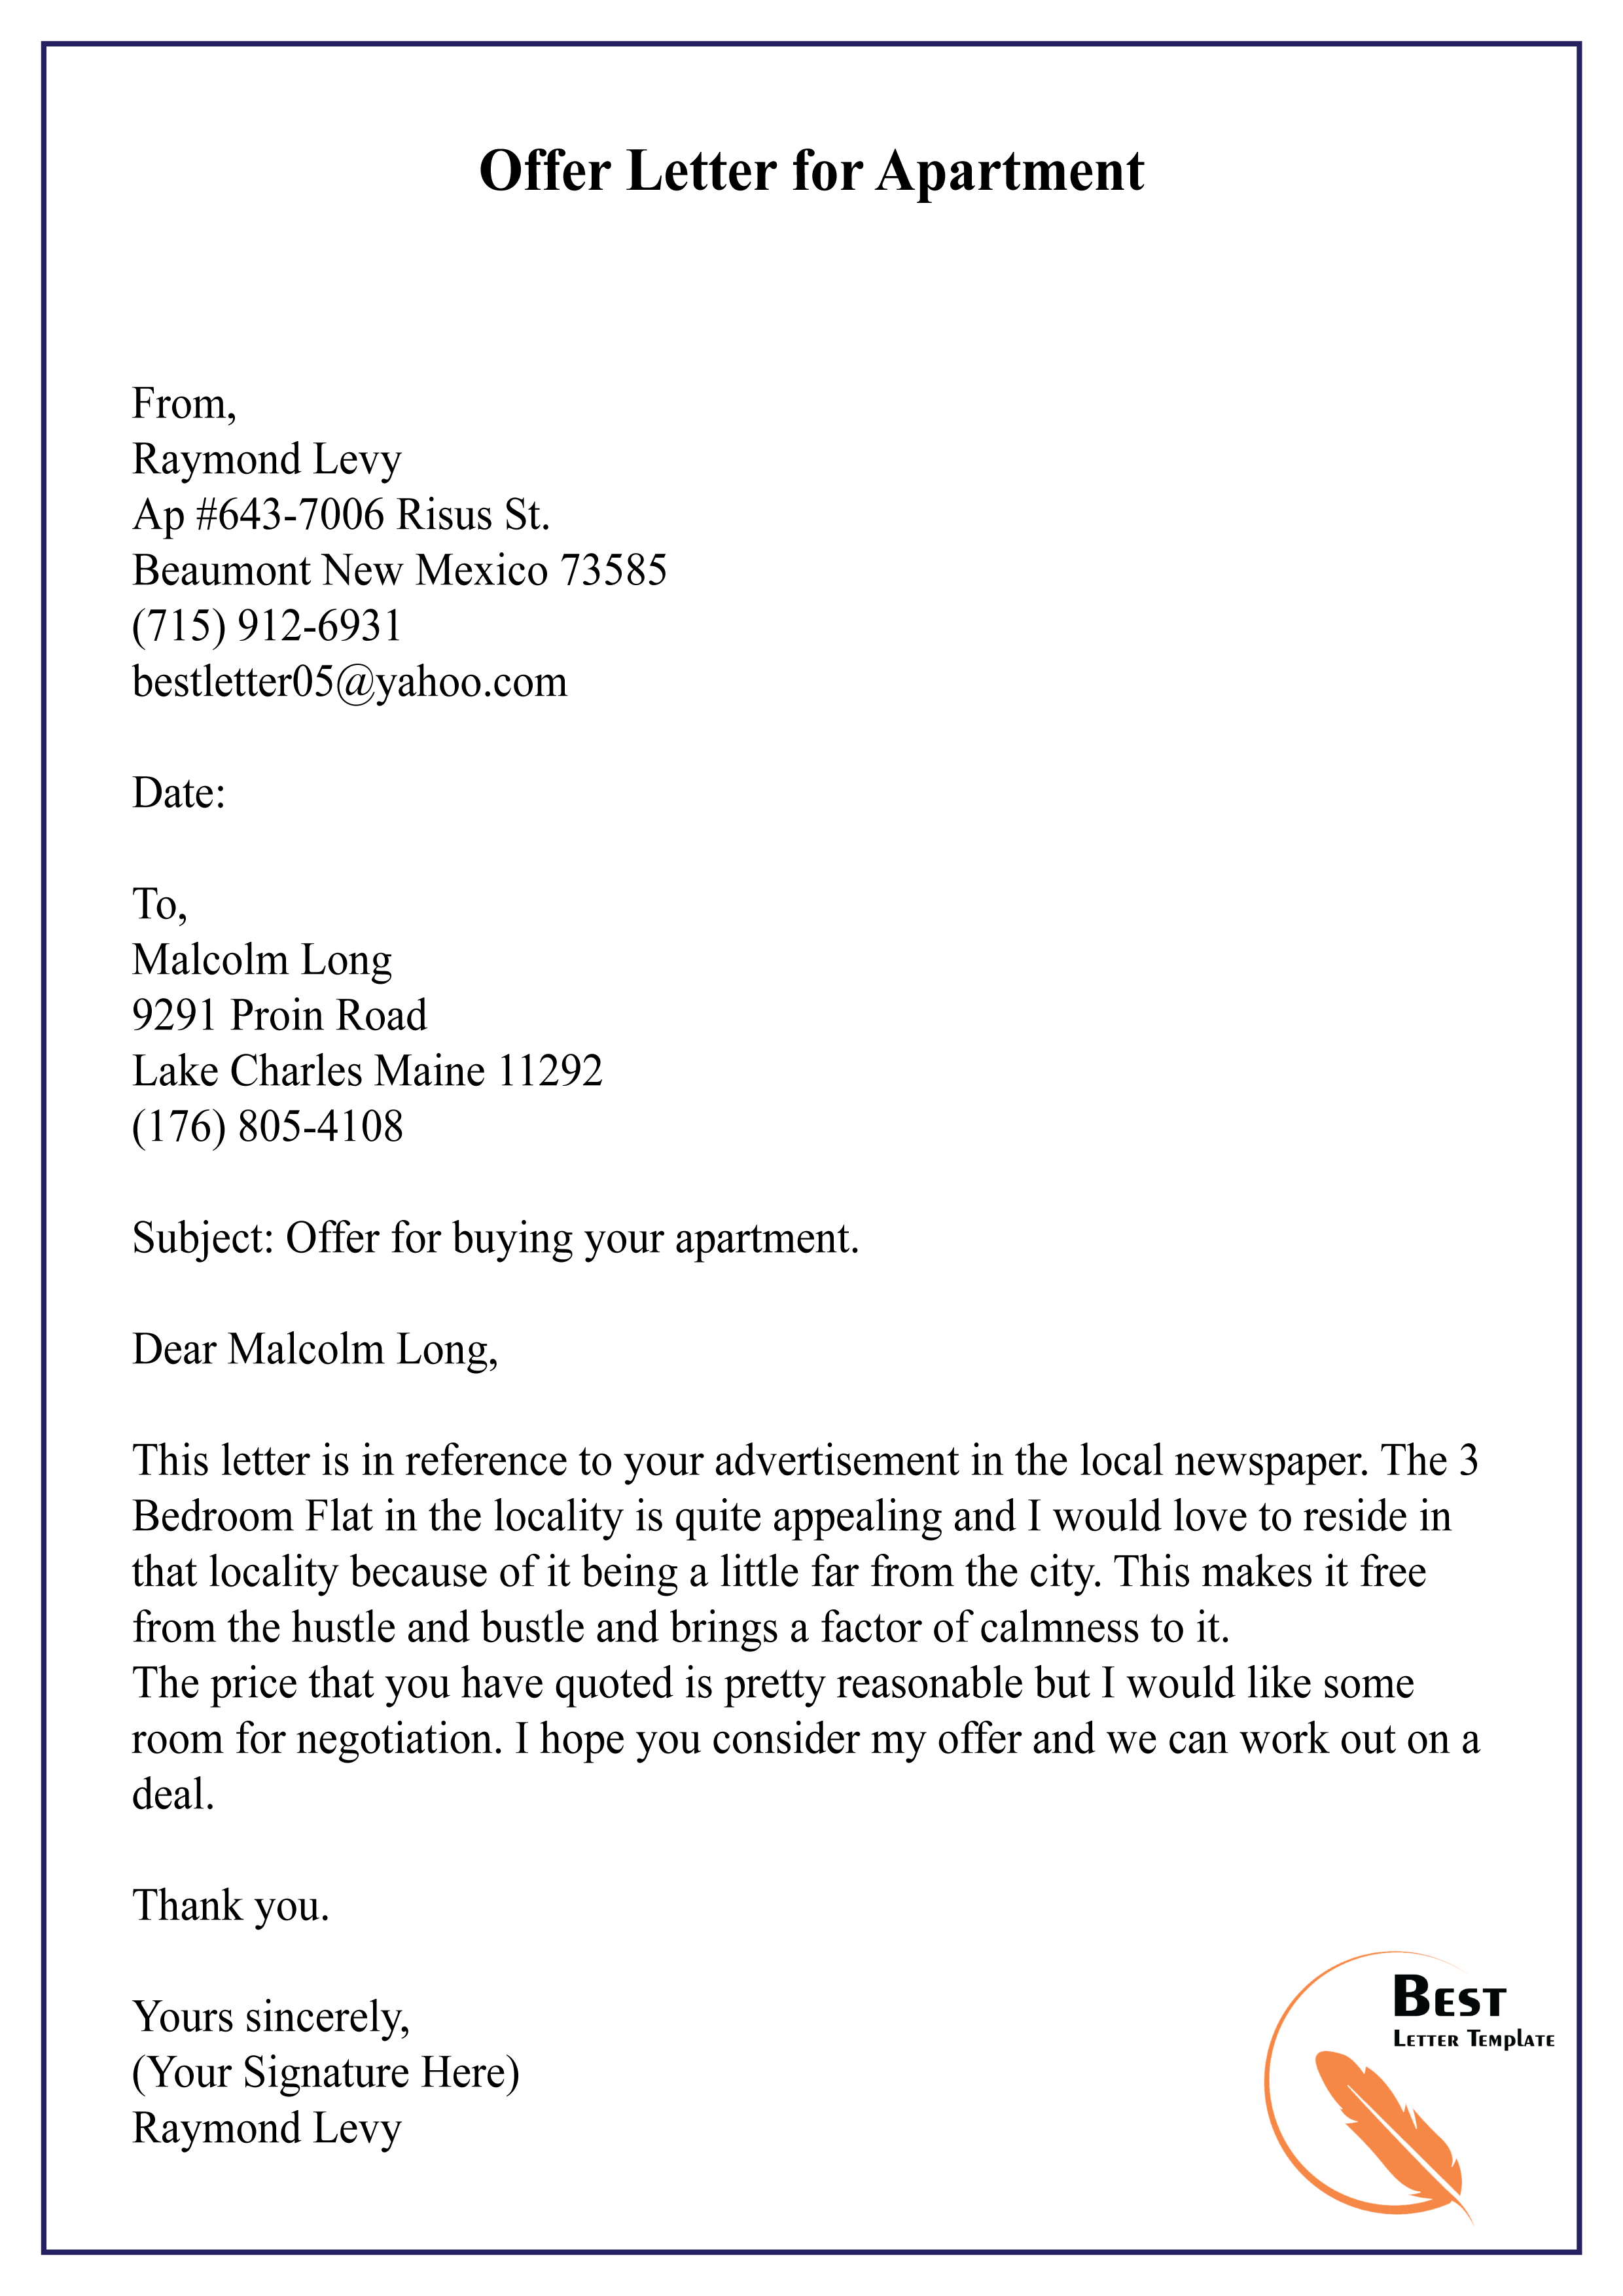 offer-letter-template-for-apartment-rental